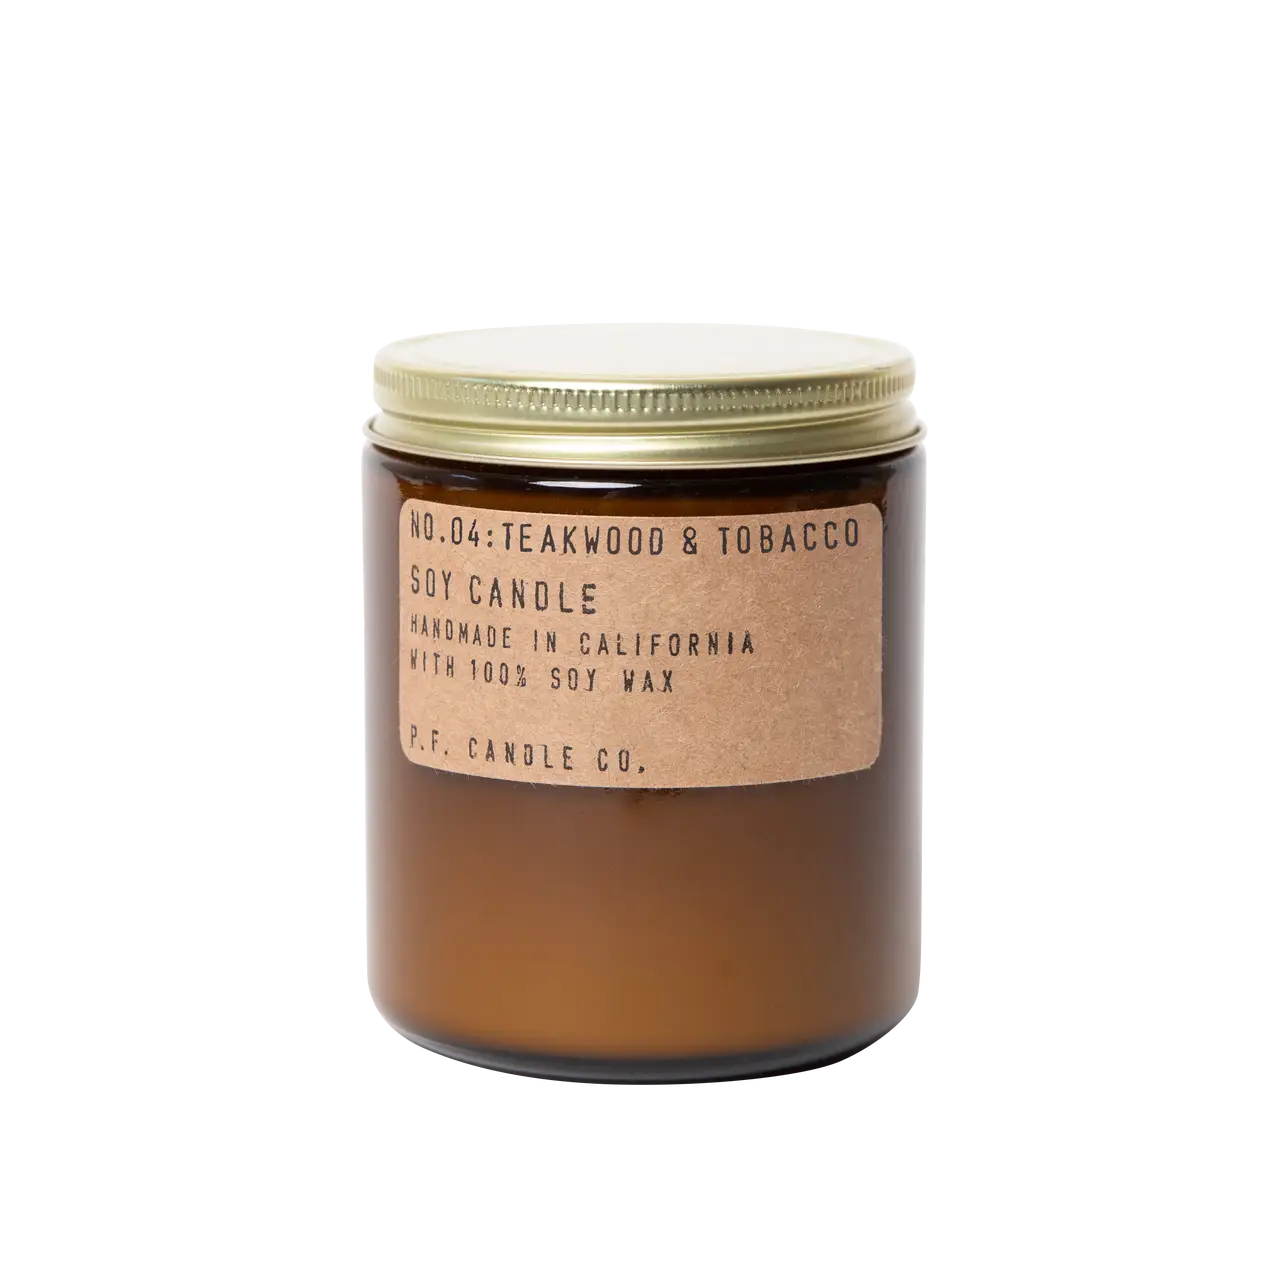 teakwood & tobacco candle by P.F. Candle Co.